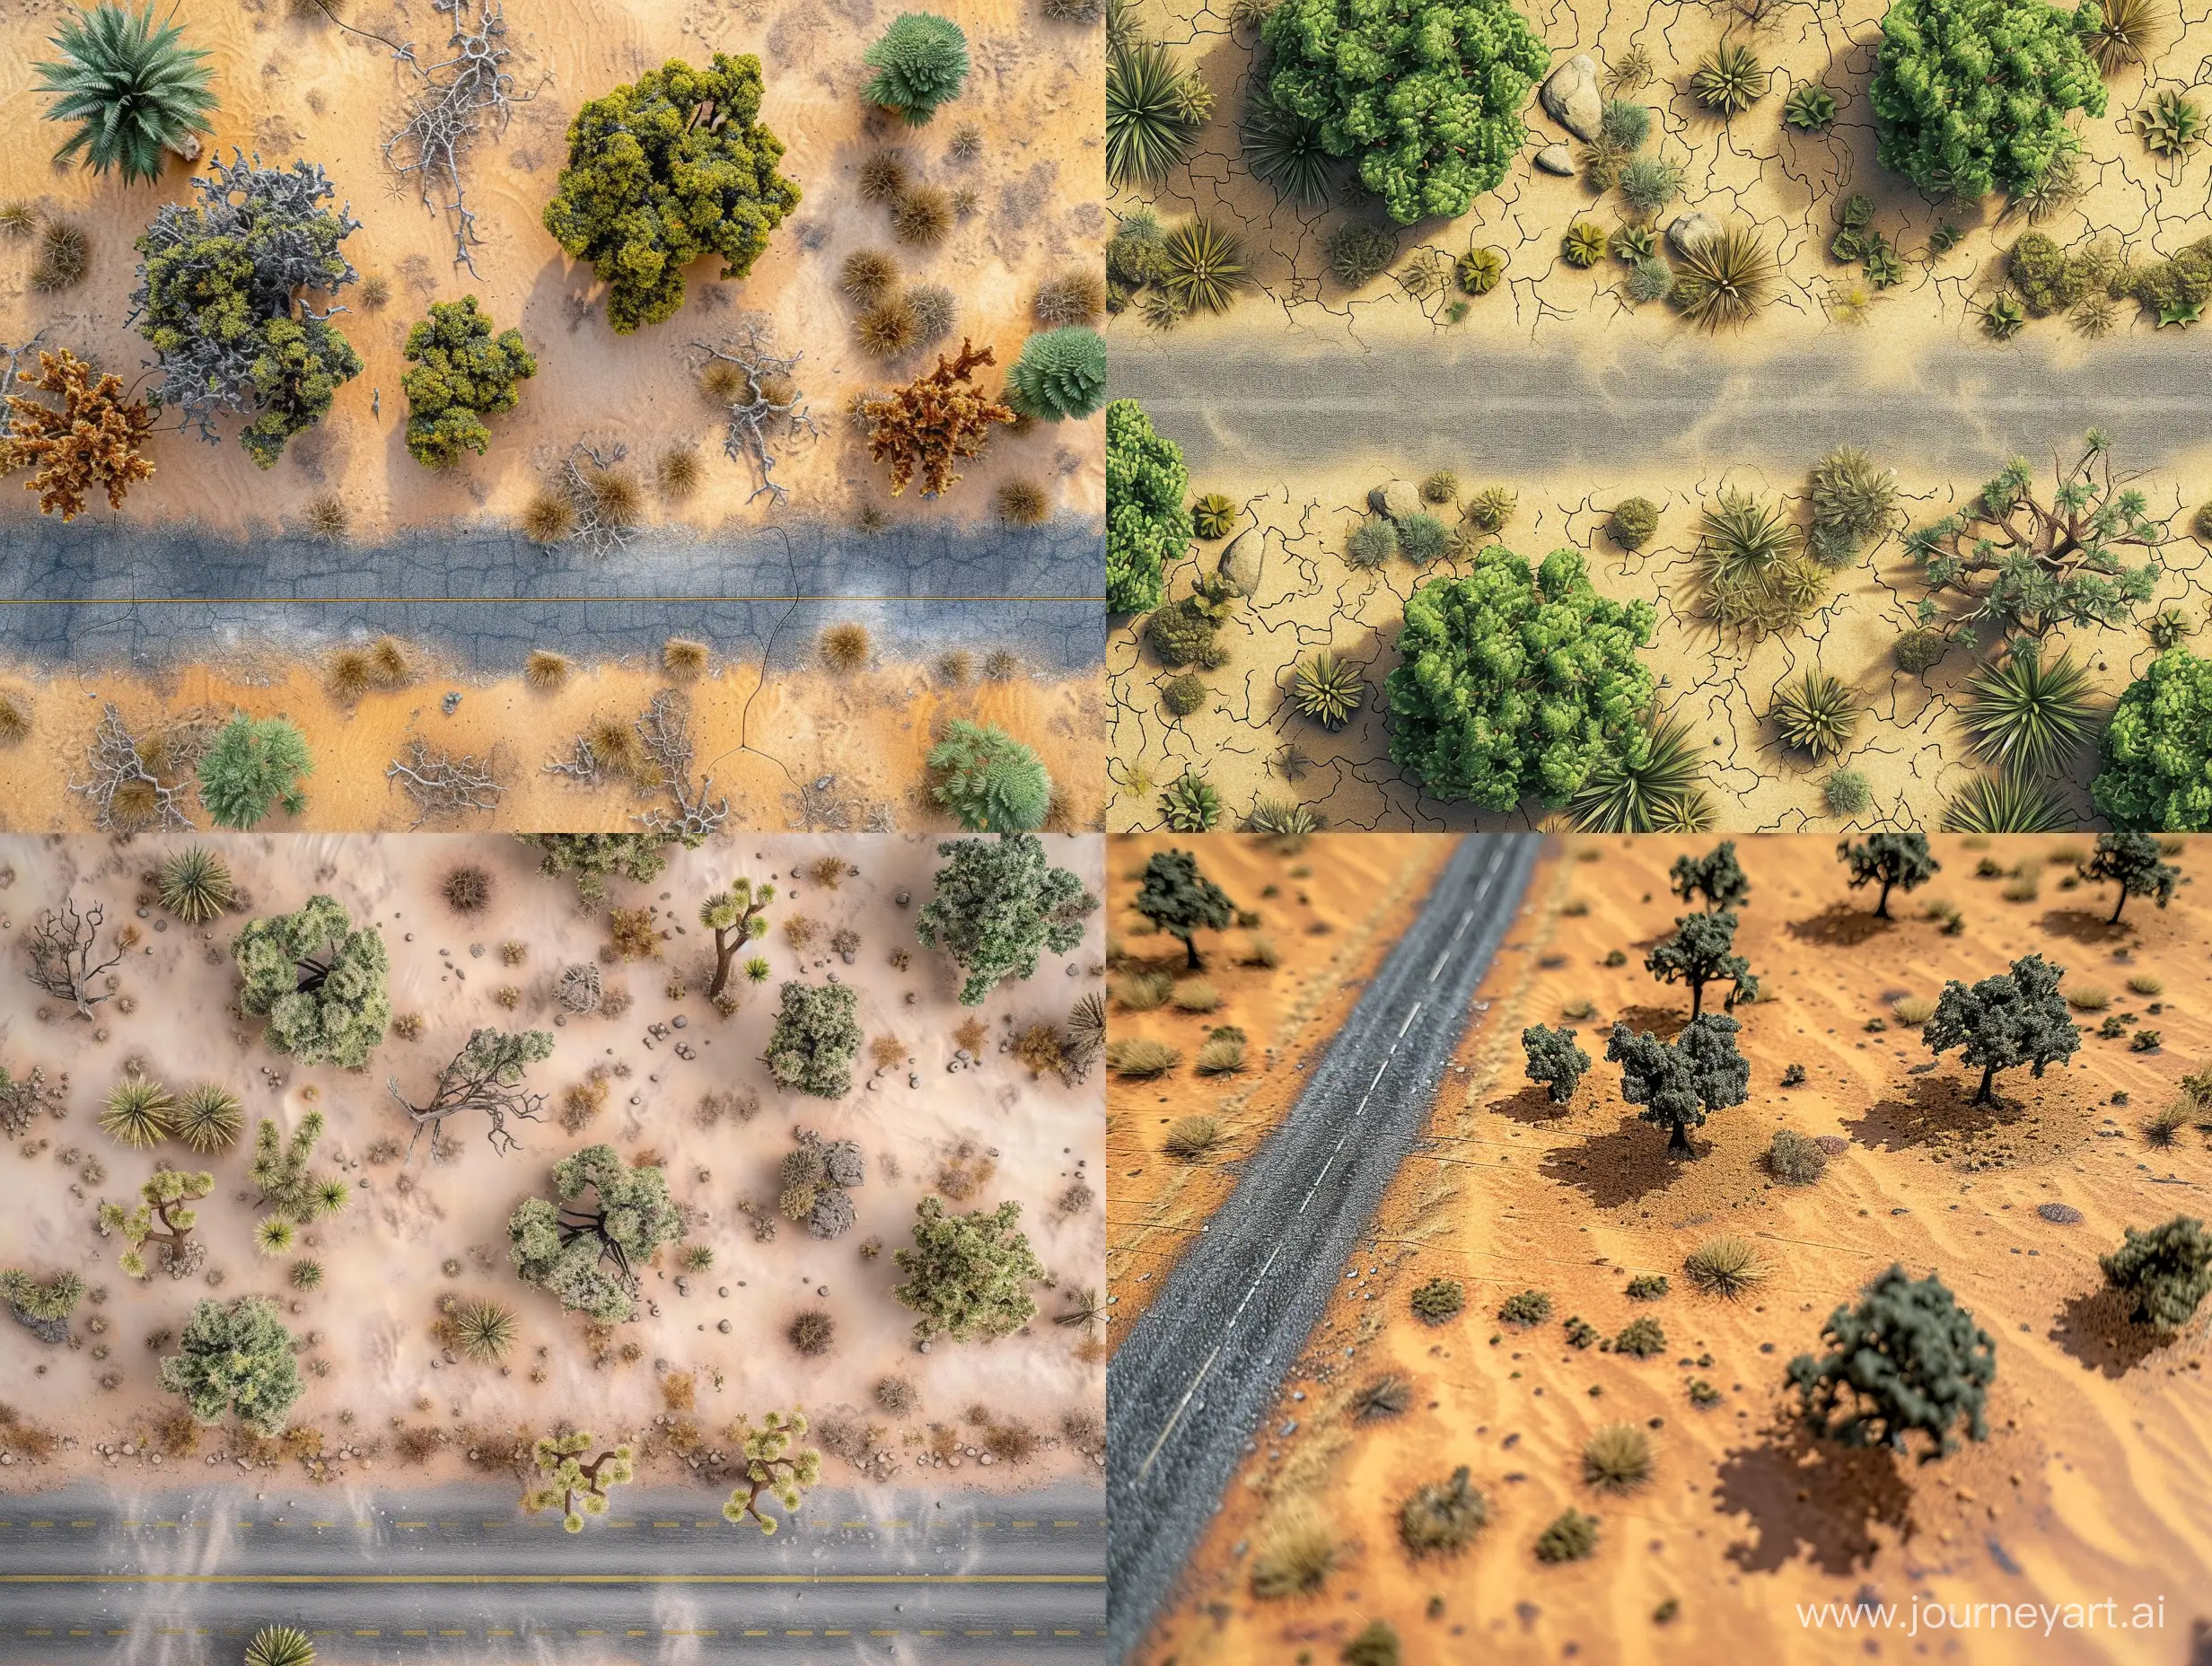 Strategic-Board-Game-in-a-Desert-Oasis-Aerial-View